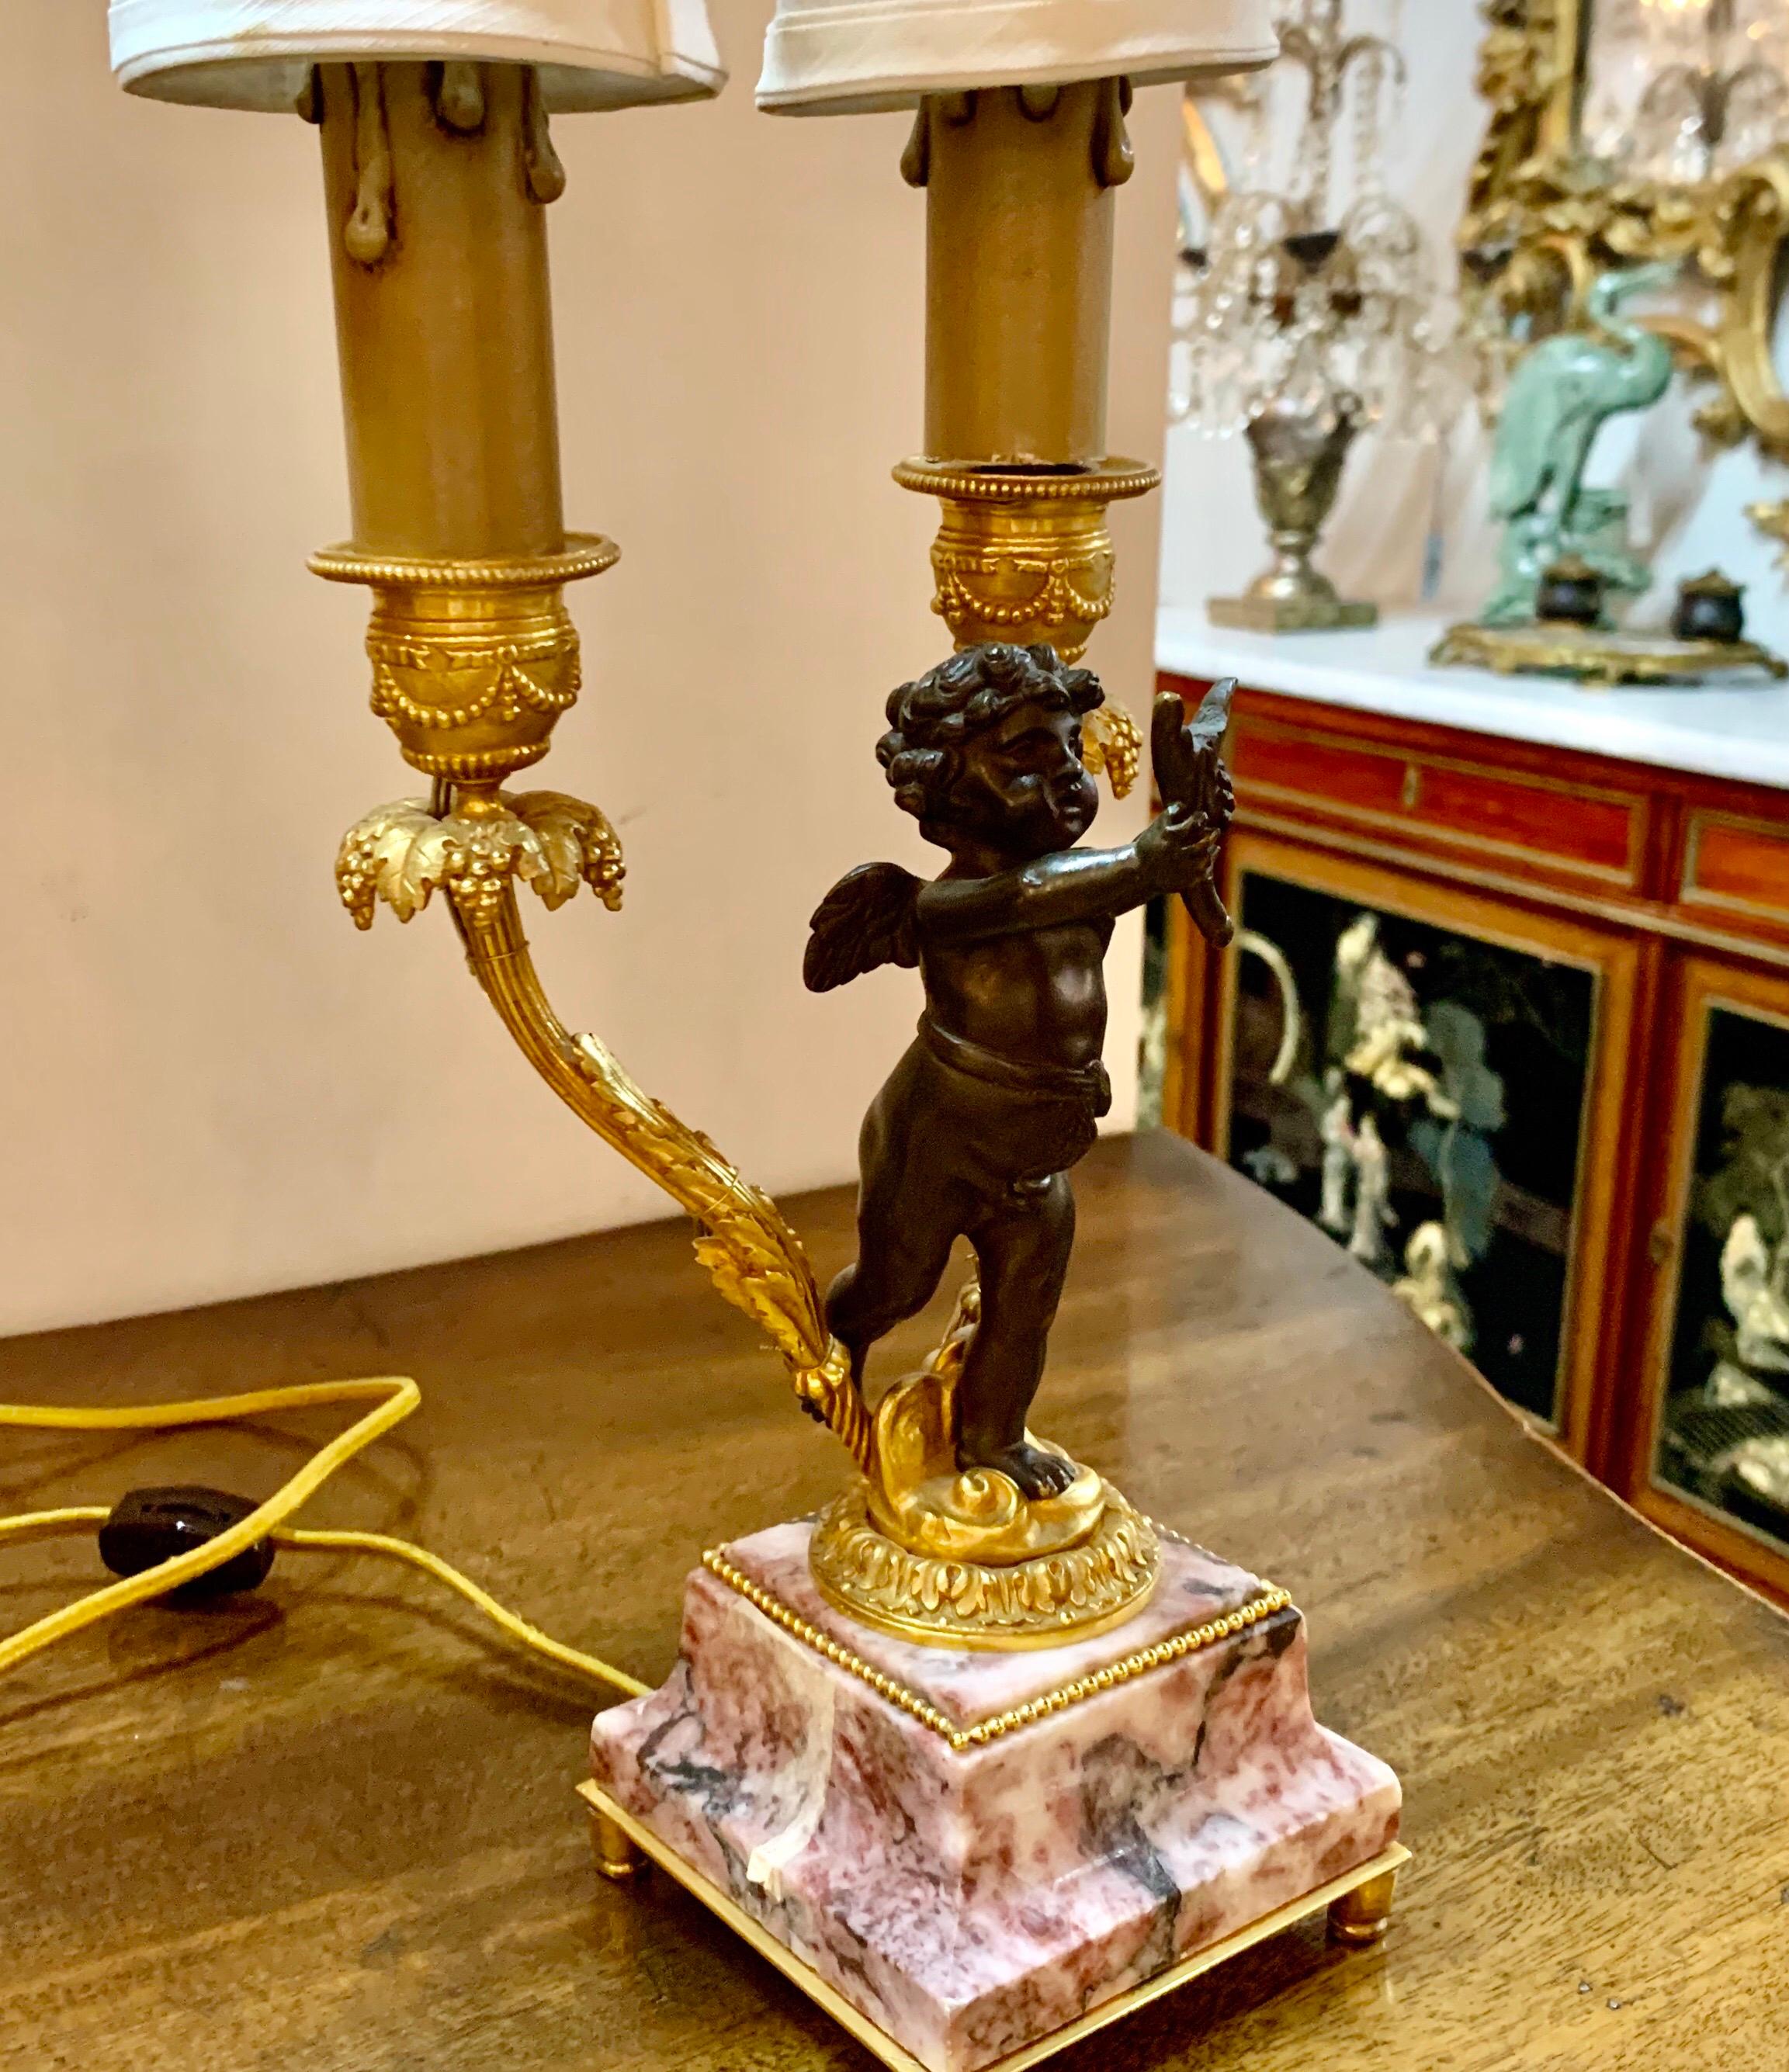 Beautiful 19th century French bronze cherub lamp on marble base. Gorgeous decorative details on the bronze candlesticks and a lovely cherub form makes this a unique piece! Wired and ready for you. So pretty!